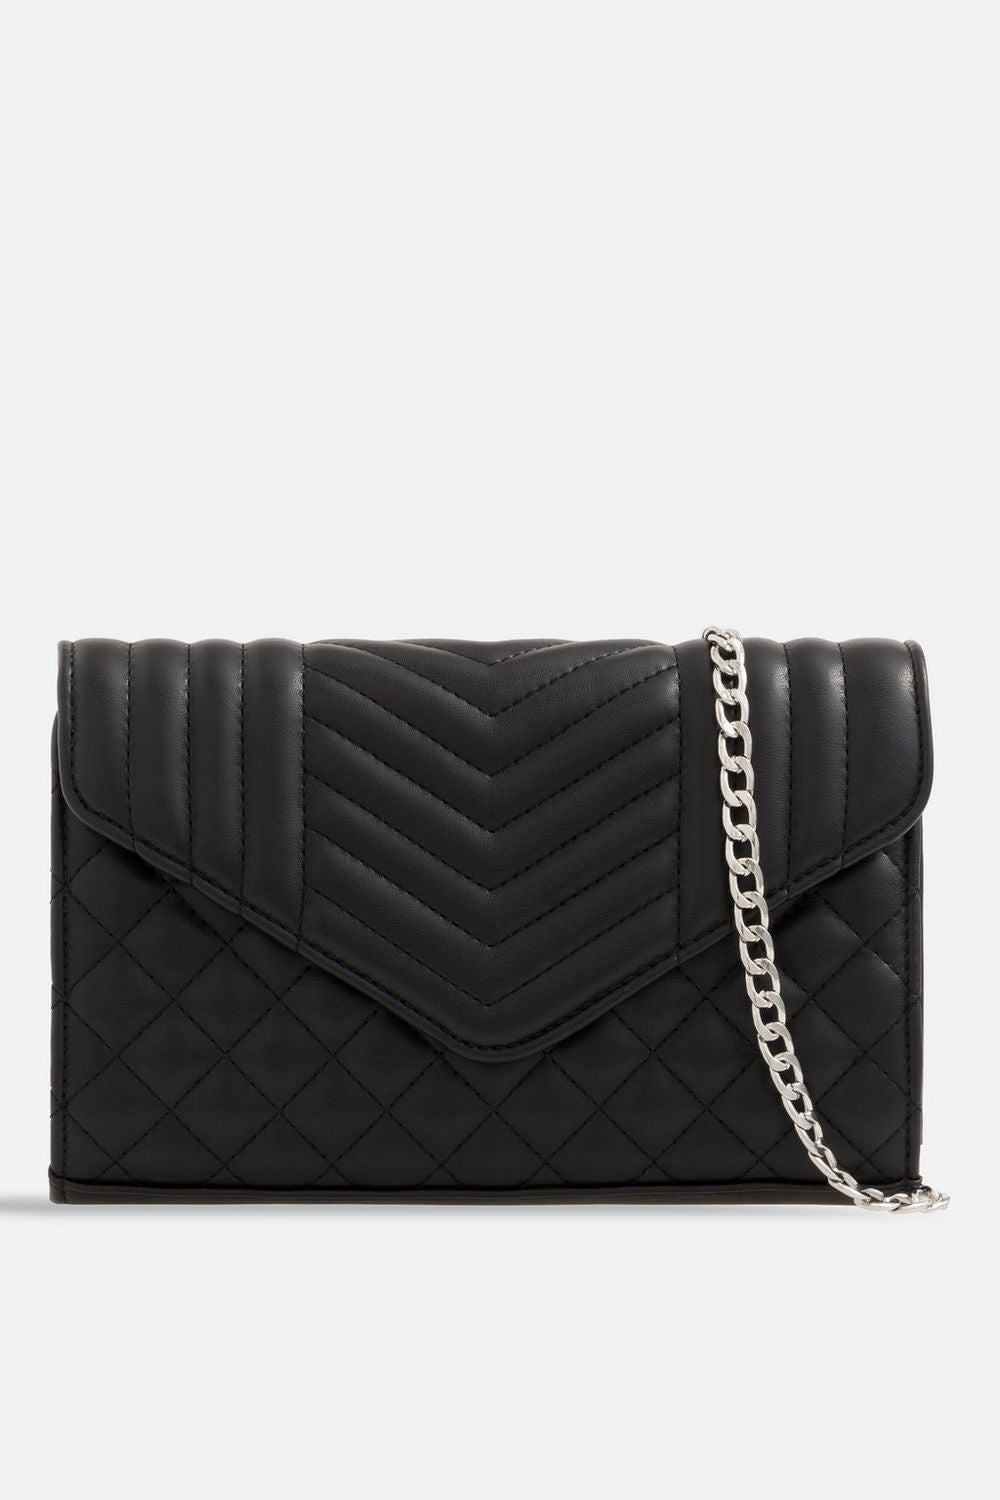 TOPSHOP - QUILTED SOFT FAUX LEATHER CLUTCH